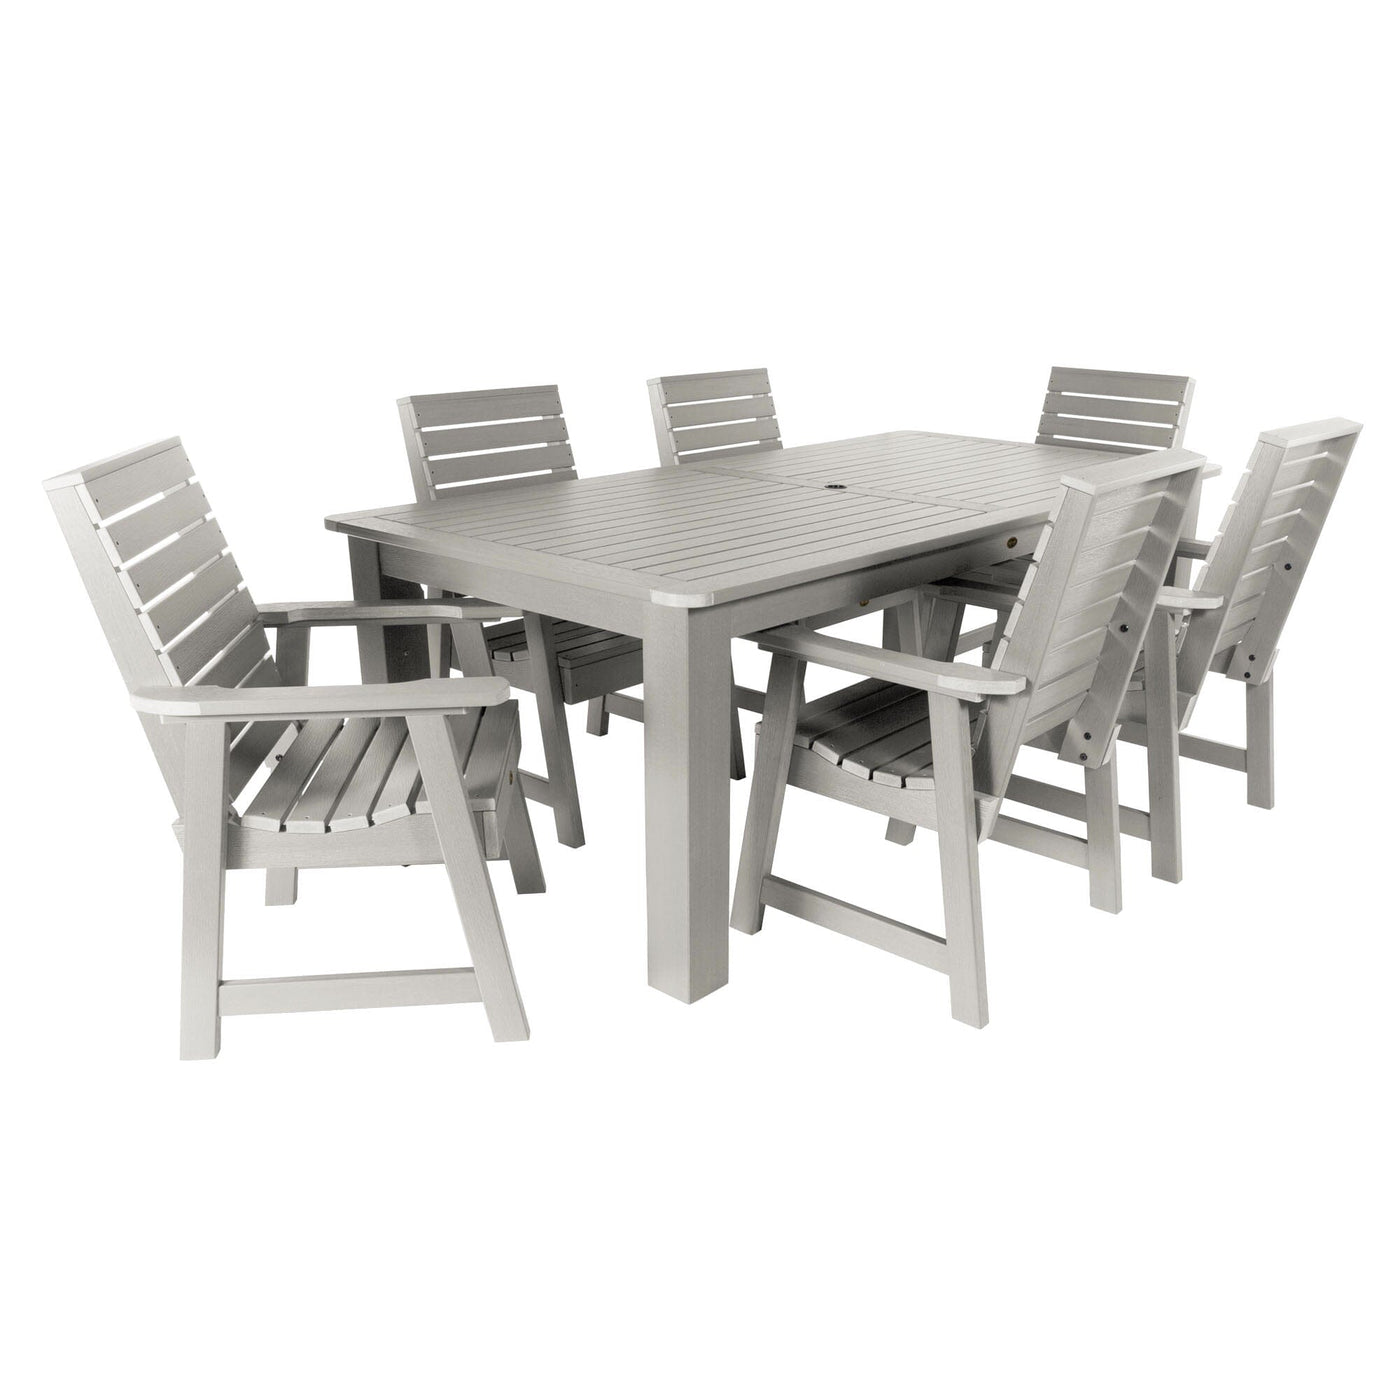 Weatherly 7pc Rectangular Outdoor Dining Set 42in x 84in - Dining Height Dining Highwood USA Harbor Gray 